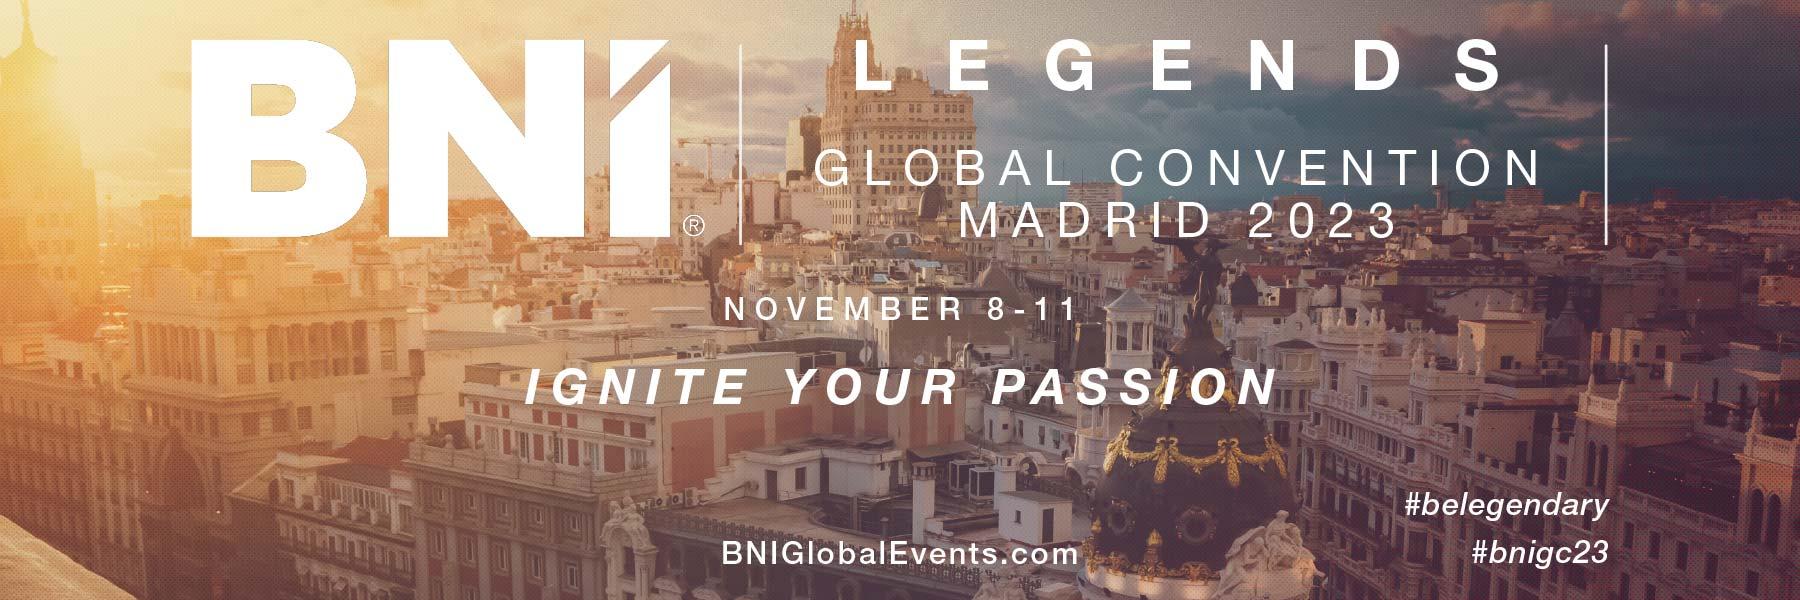 BNI Global Convention 2023 in Madrid